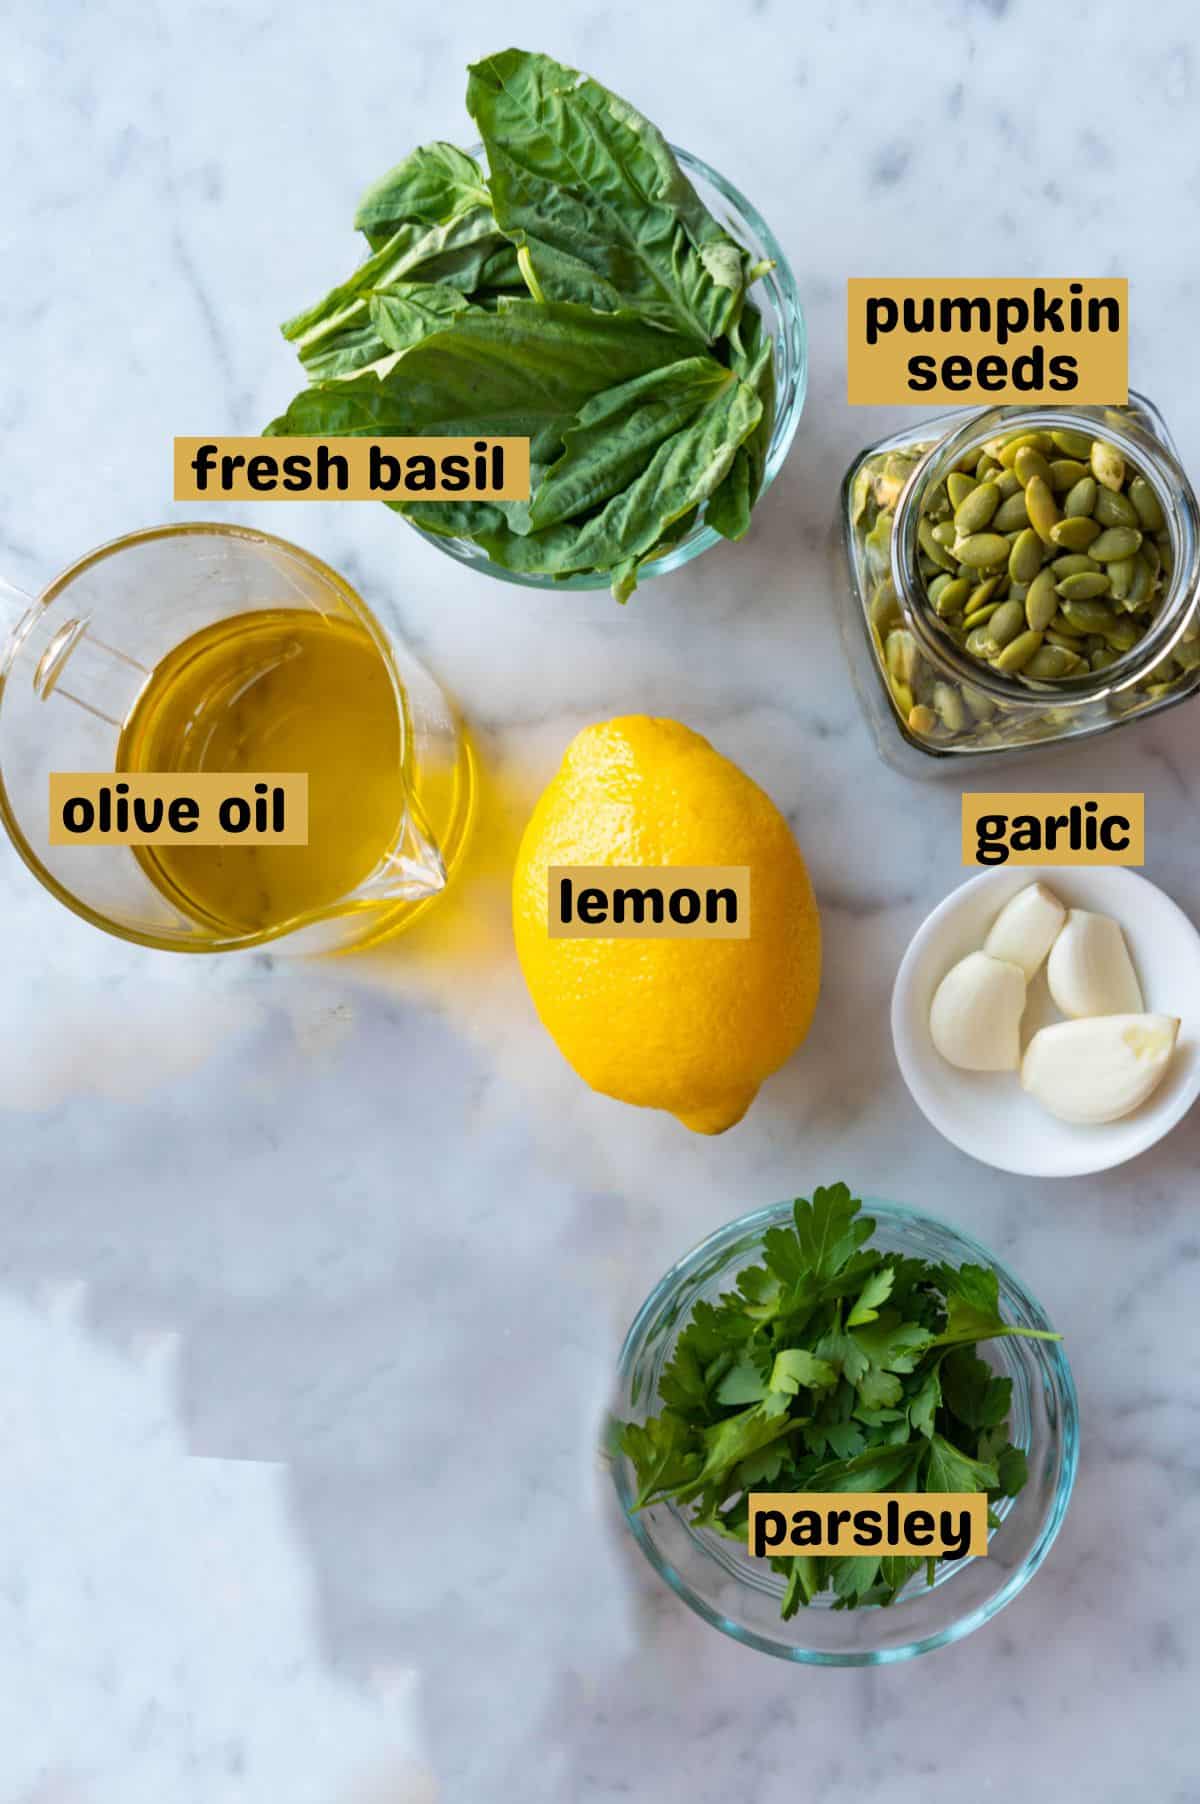 Pumpkin seeds, parsley leaves, lemon, four garlic cloves, olive oil, and fresh basil leaves in glass containers on white marble.